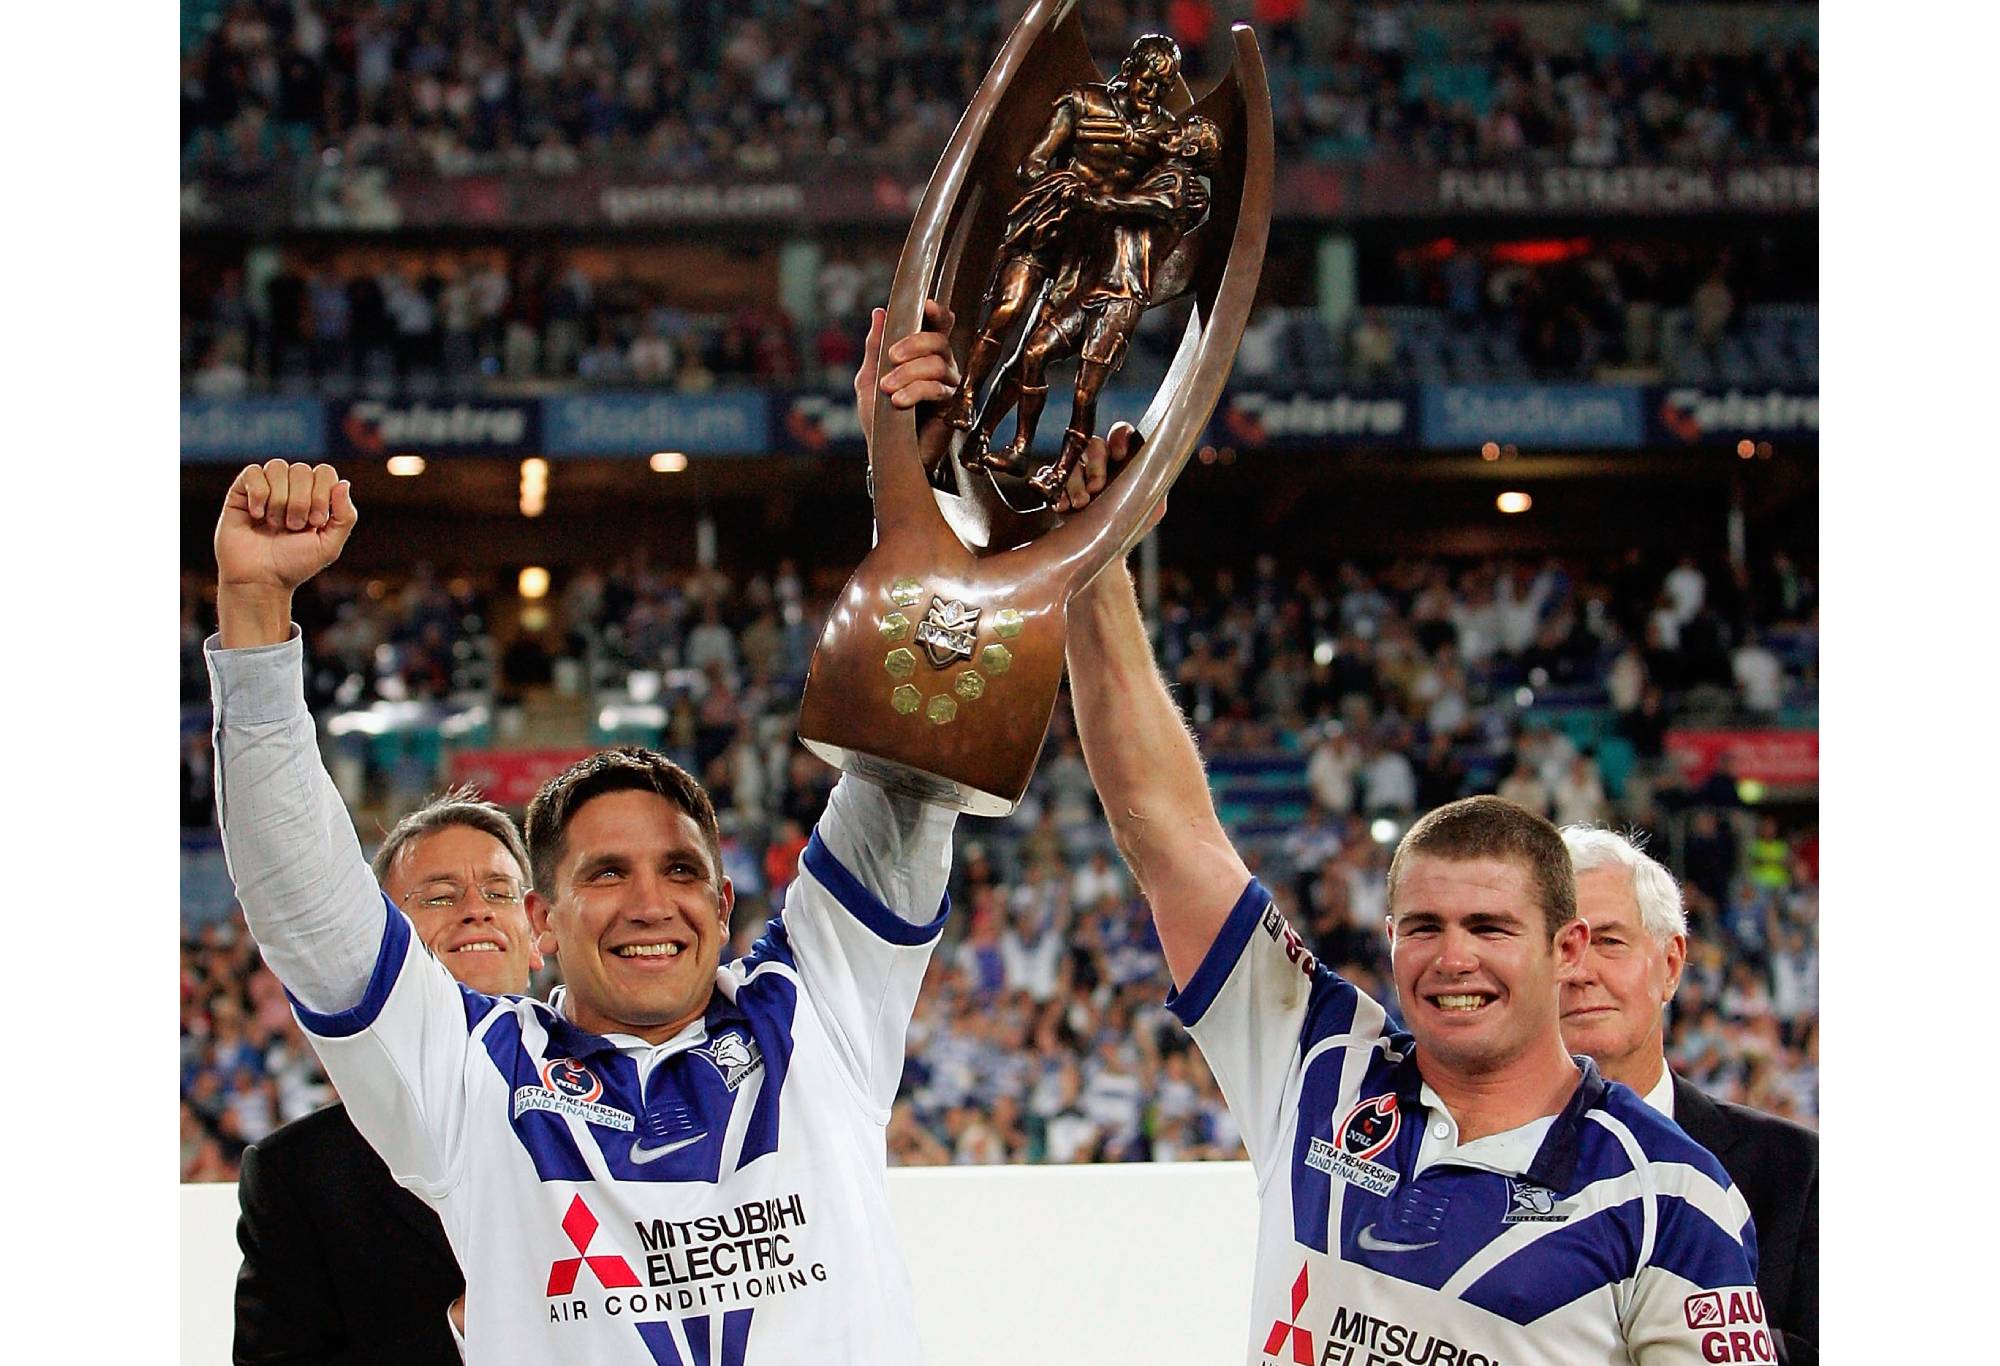 SYDNEY, AUSTRALIA - OCTOBER 3: (L-R) Injured captain Steve Price and stand in captain Andrew Ryan of the Bulldogs celebrate with the trophy during the NRL Grand Final  between the Sydney Roosters and the Bulldogs held at Telstra Stadium, October 3, 2004 in Sydney, Australia. (Photo by Nick Laham/Getty Images)